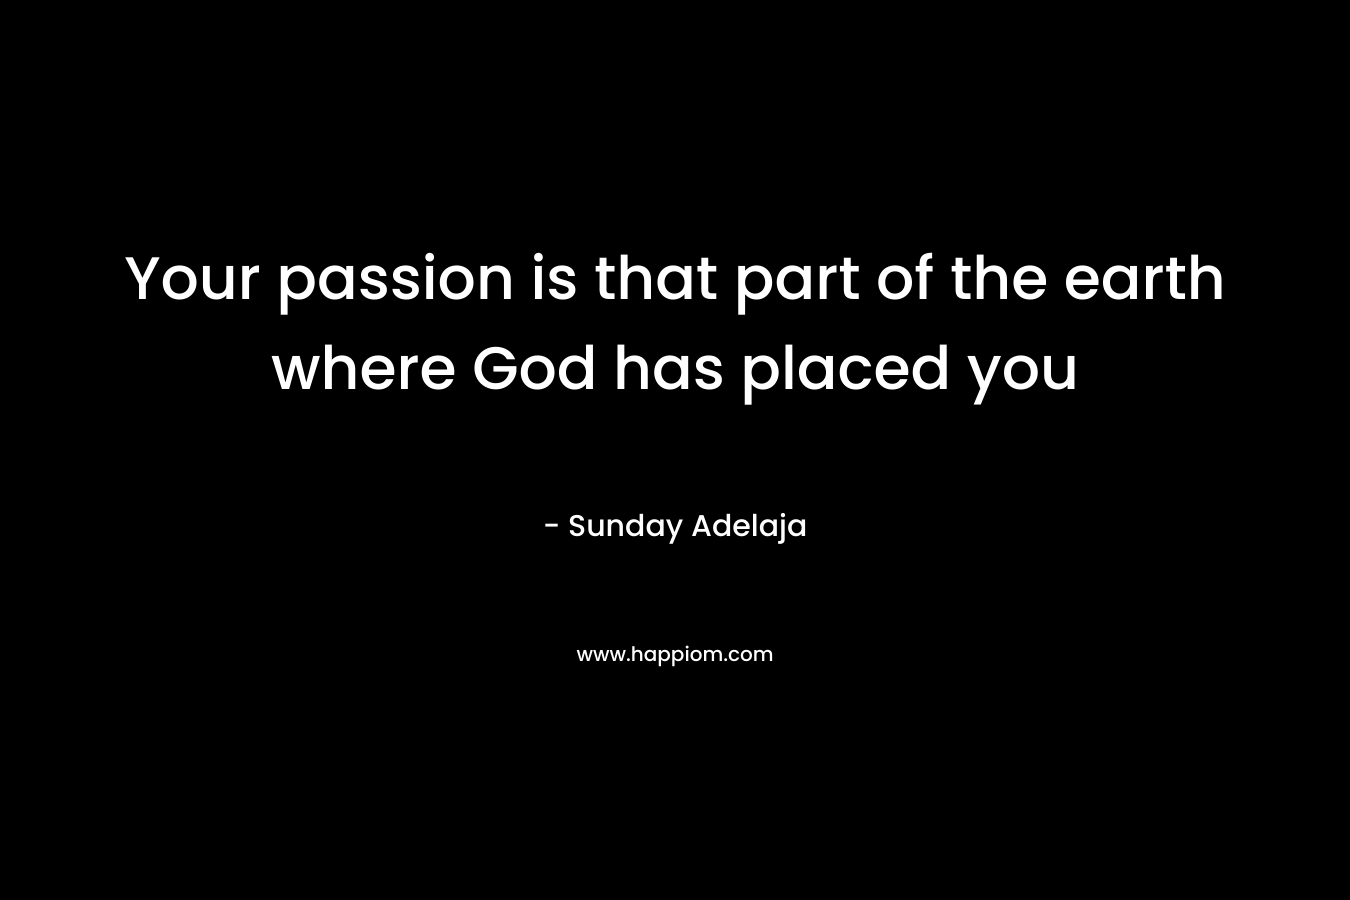 Your passion is that part of the earth where God has placed you